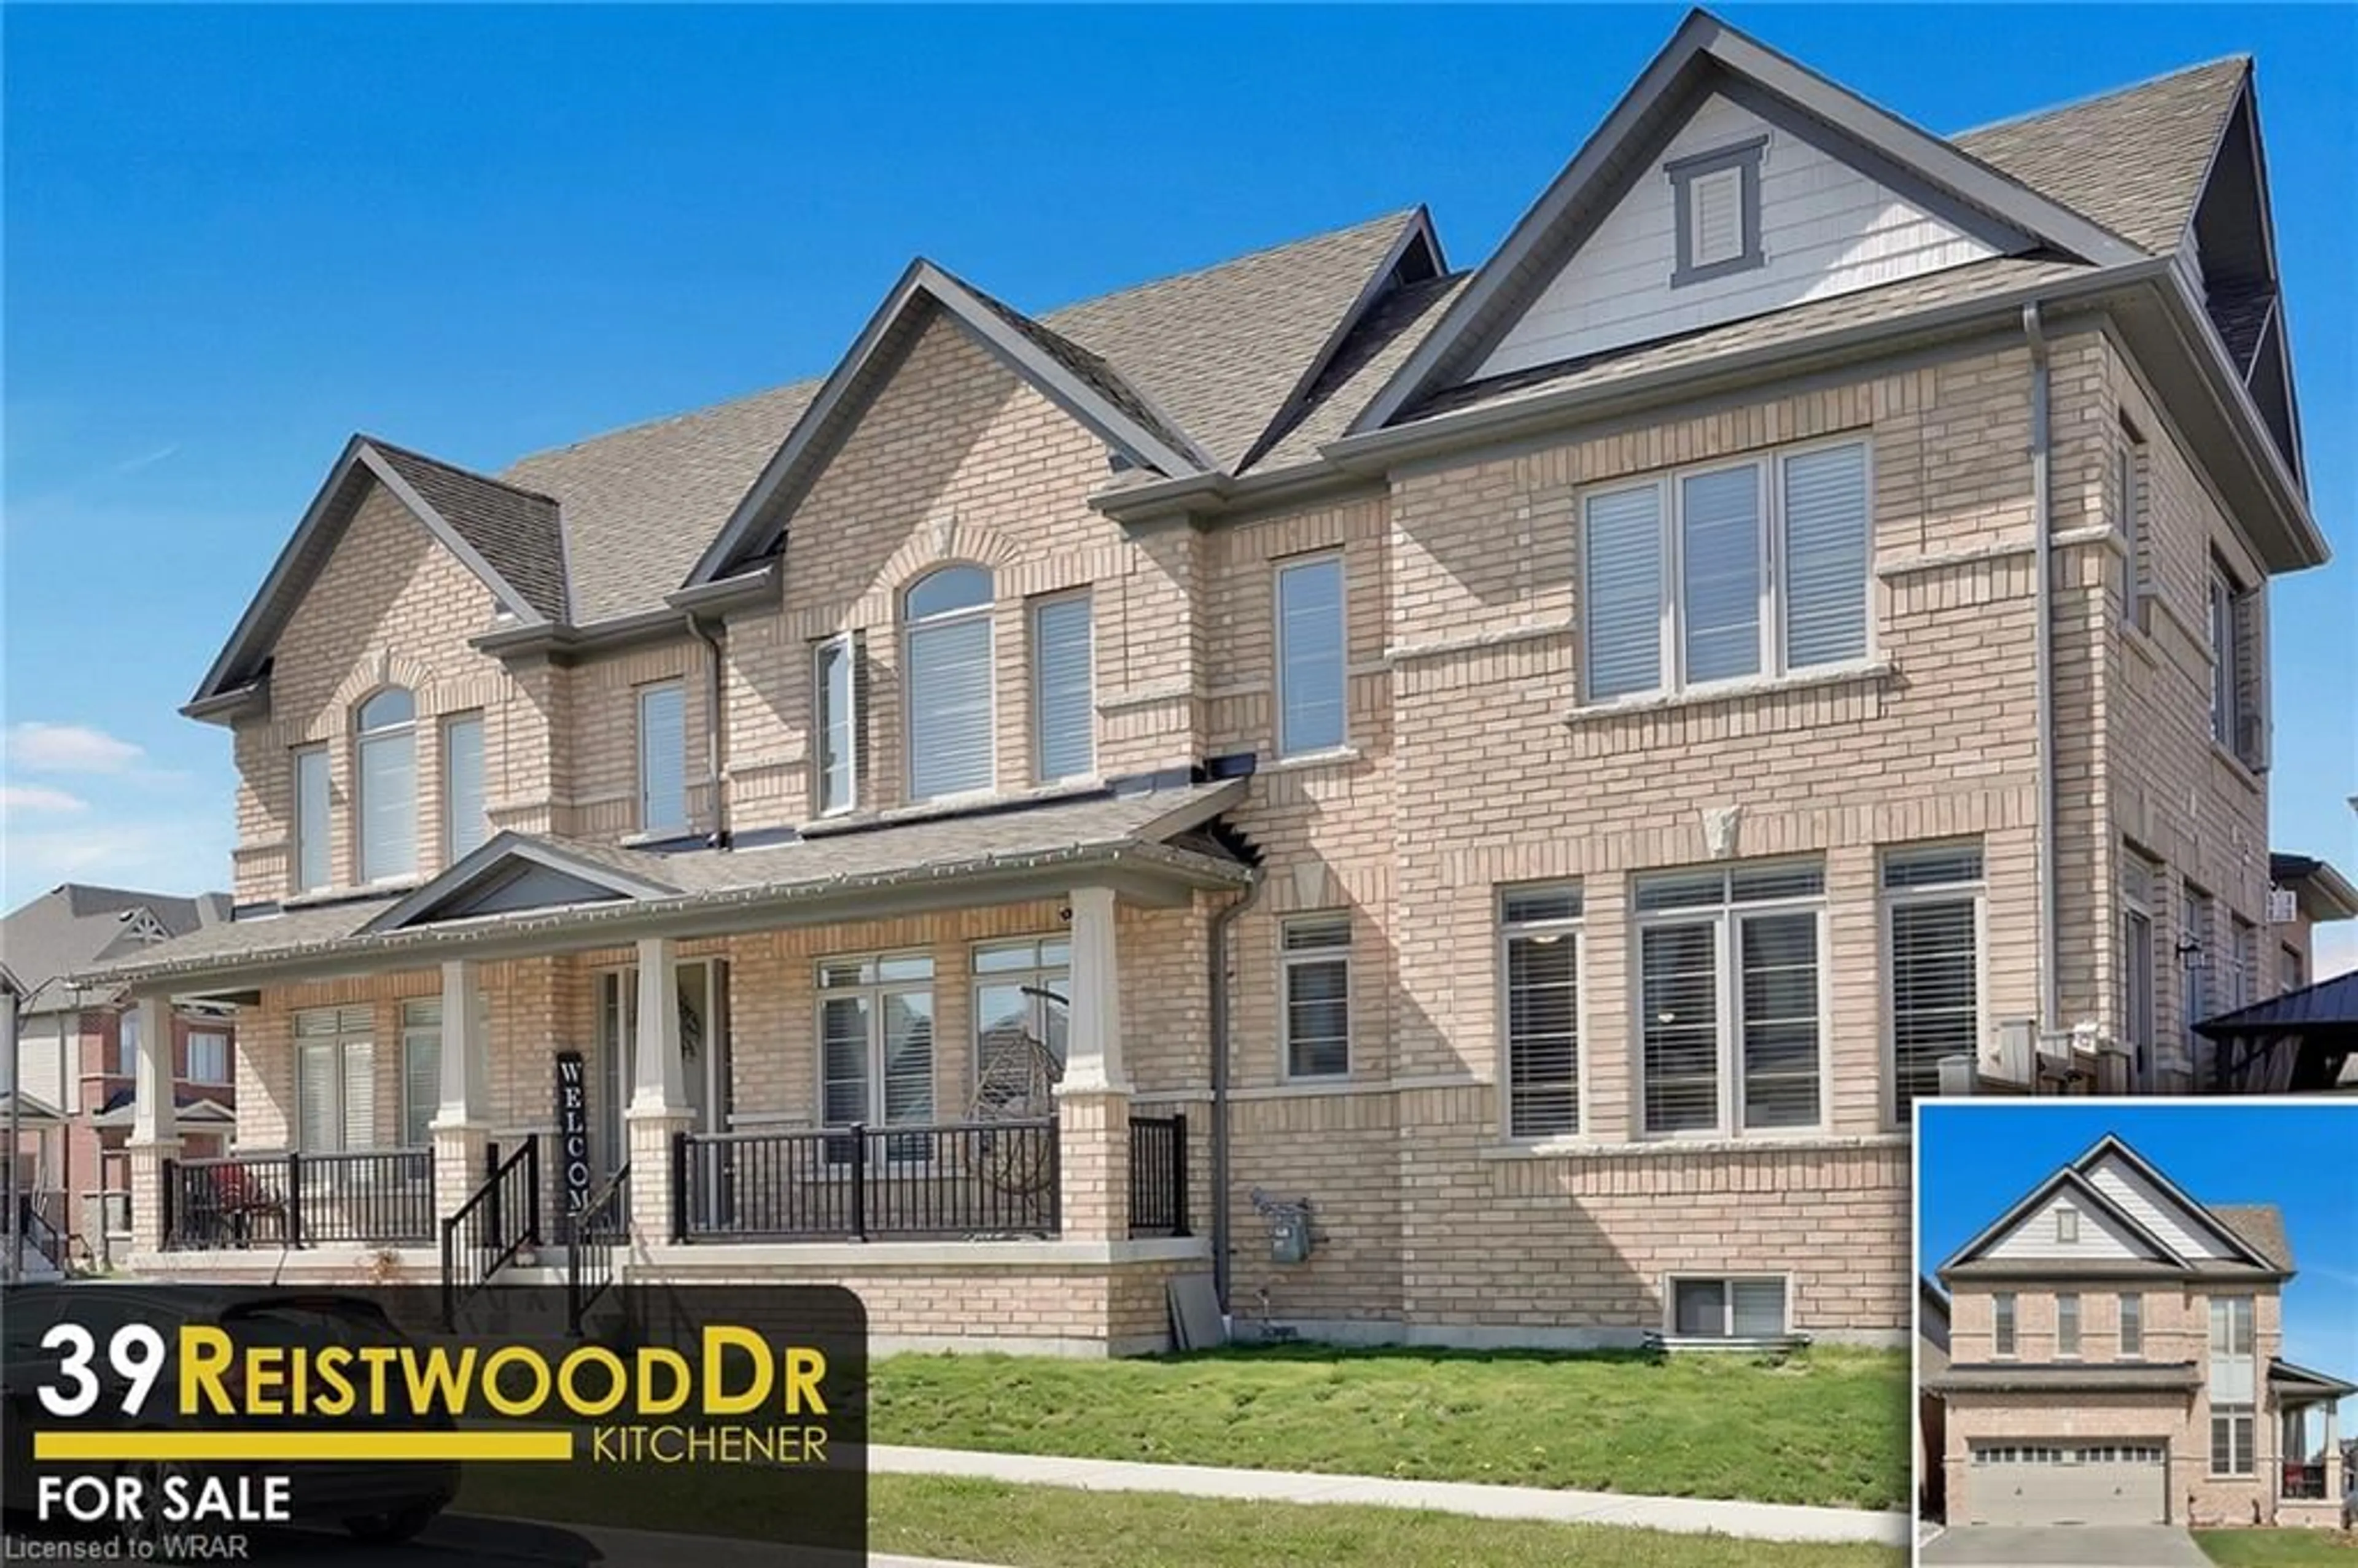 Home with brick exterior material for 39 Reistwood Drive Dr, Kitchener Ontario N2R 0N8